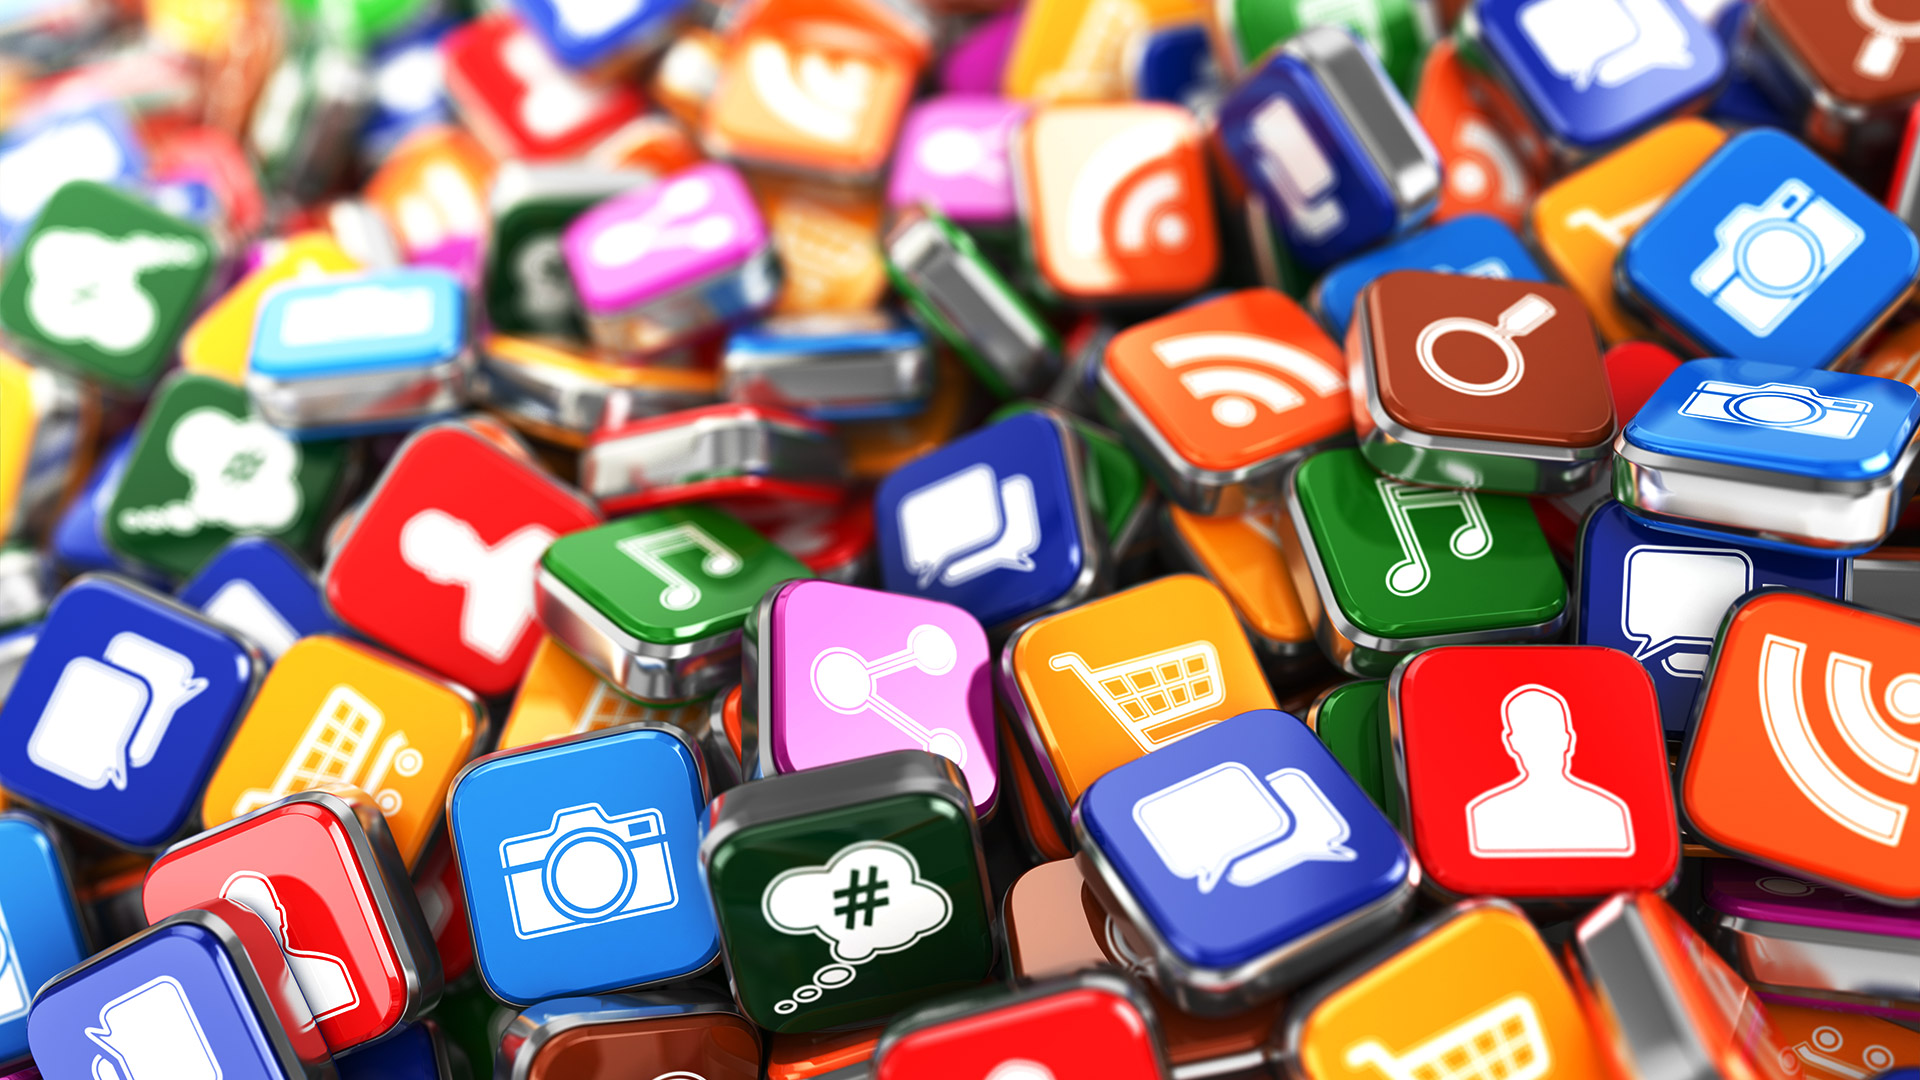 10 Steps: How to Market Your Mobile Apps